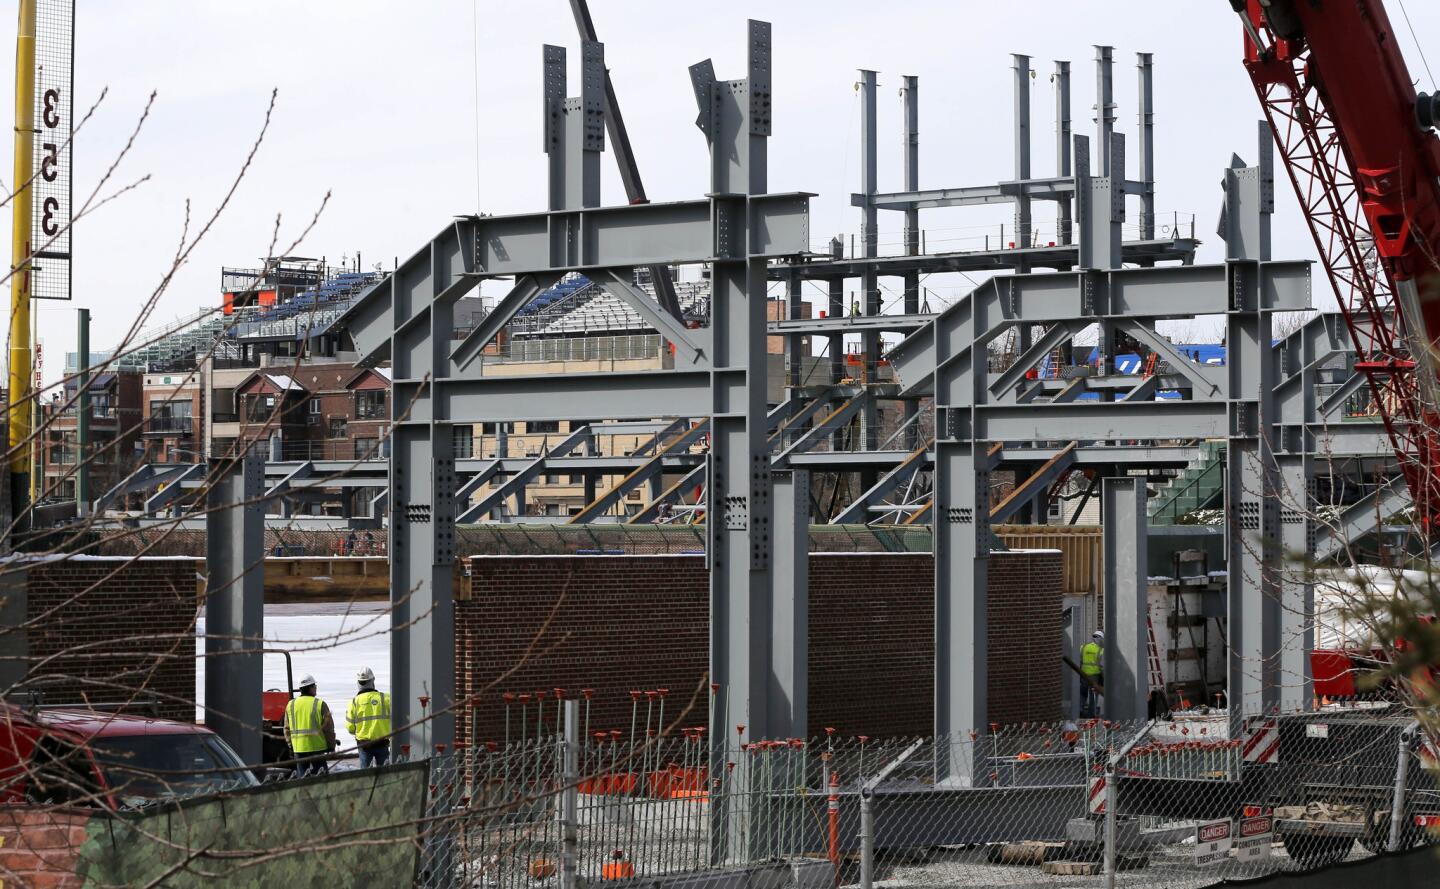 Wrigley Field's right-field bleachers are not expected to be ready until mid-June.